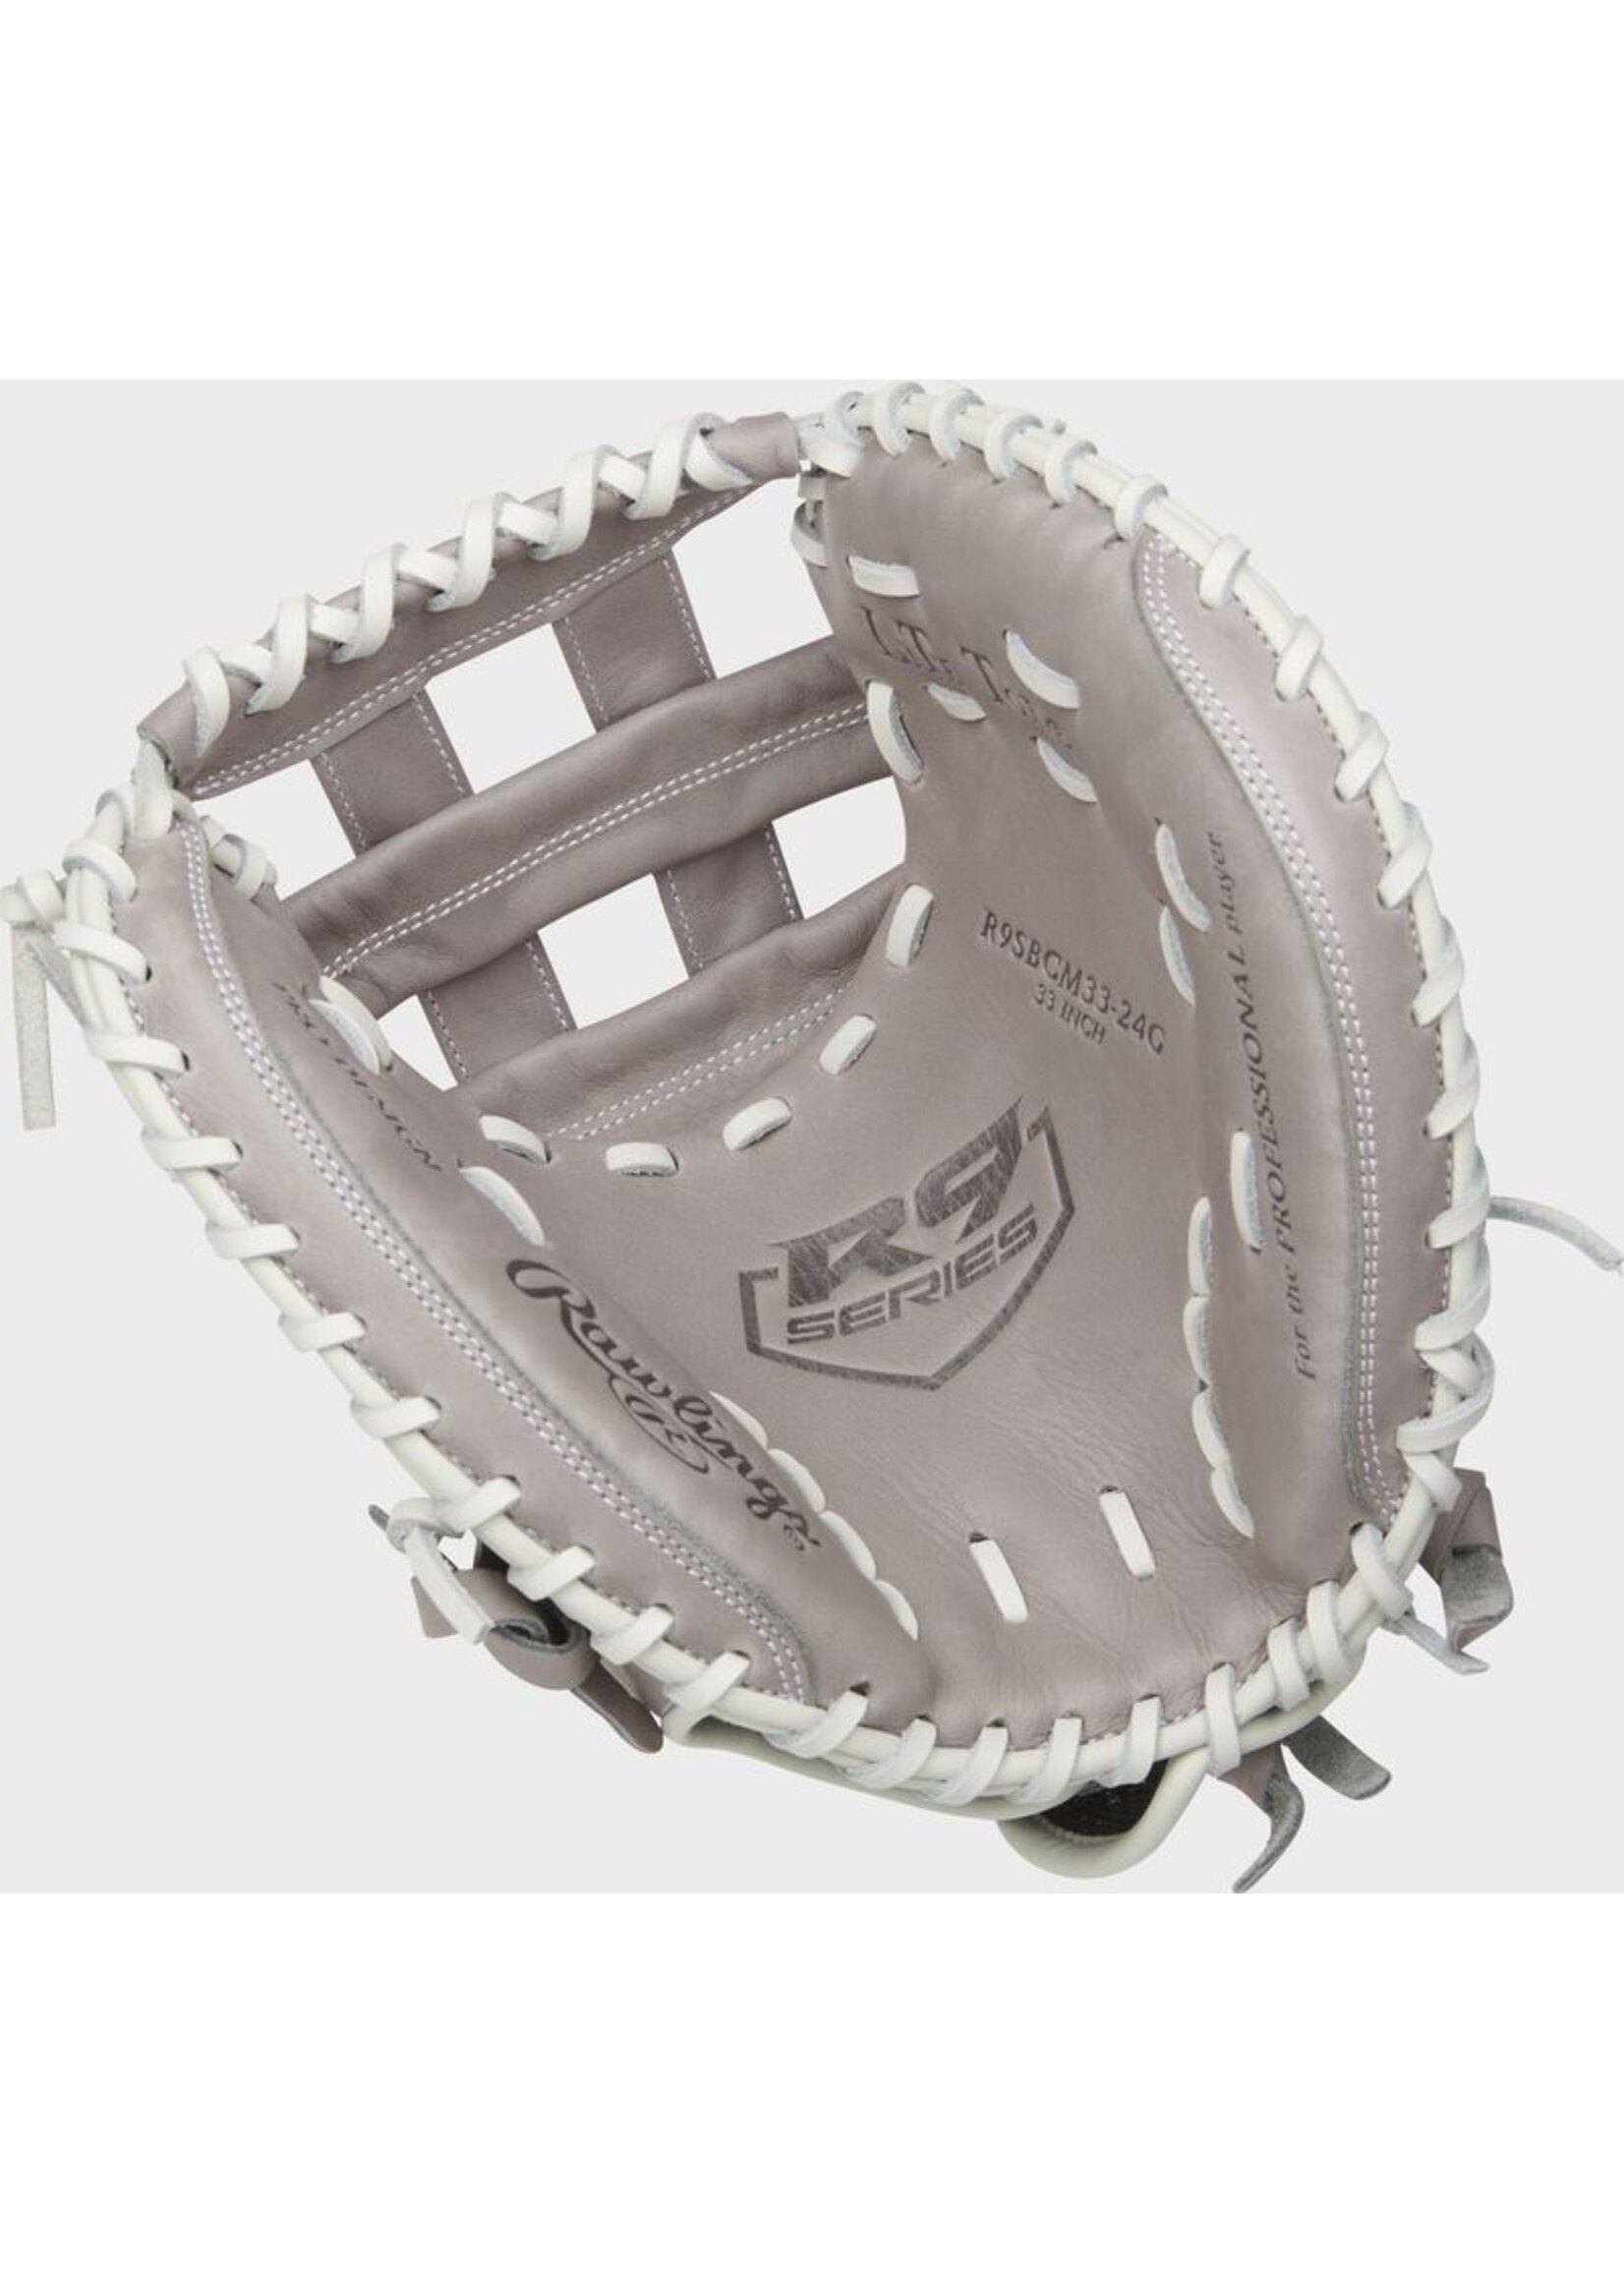 RAWLINGS R9 SERIES 33 IN FASTPITCH CATCHER'S MITT  R9SBCM33-24G-3/0